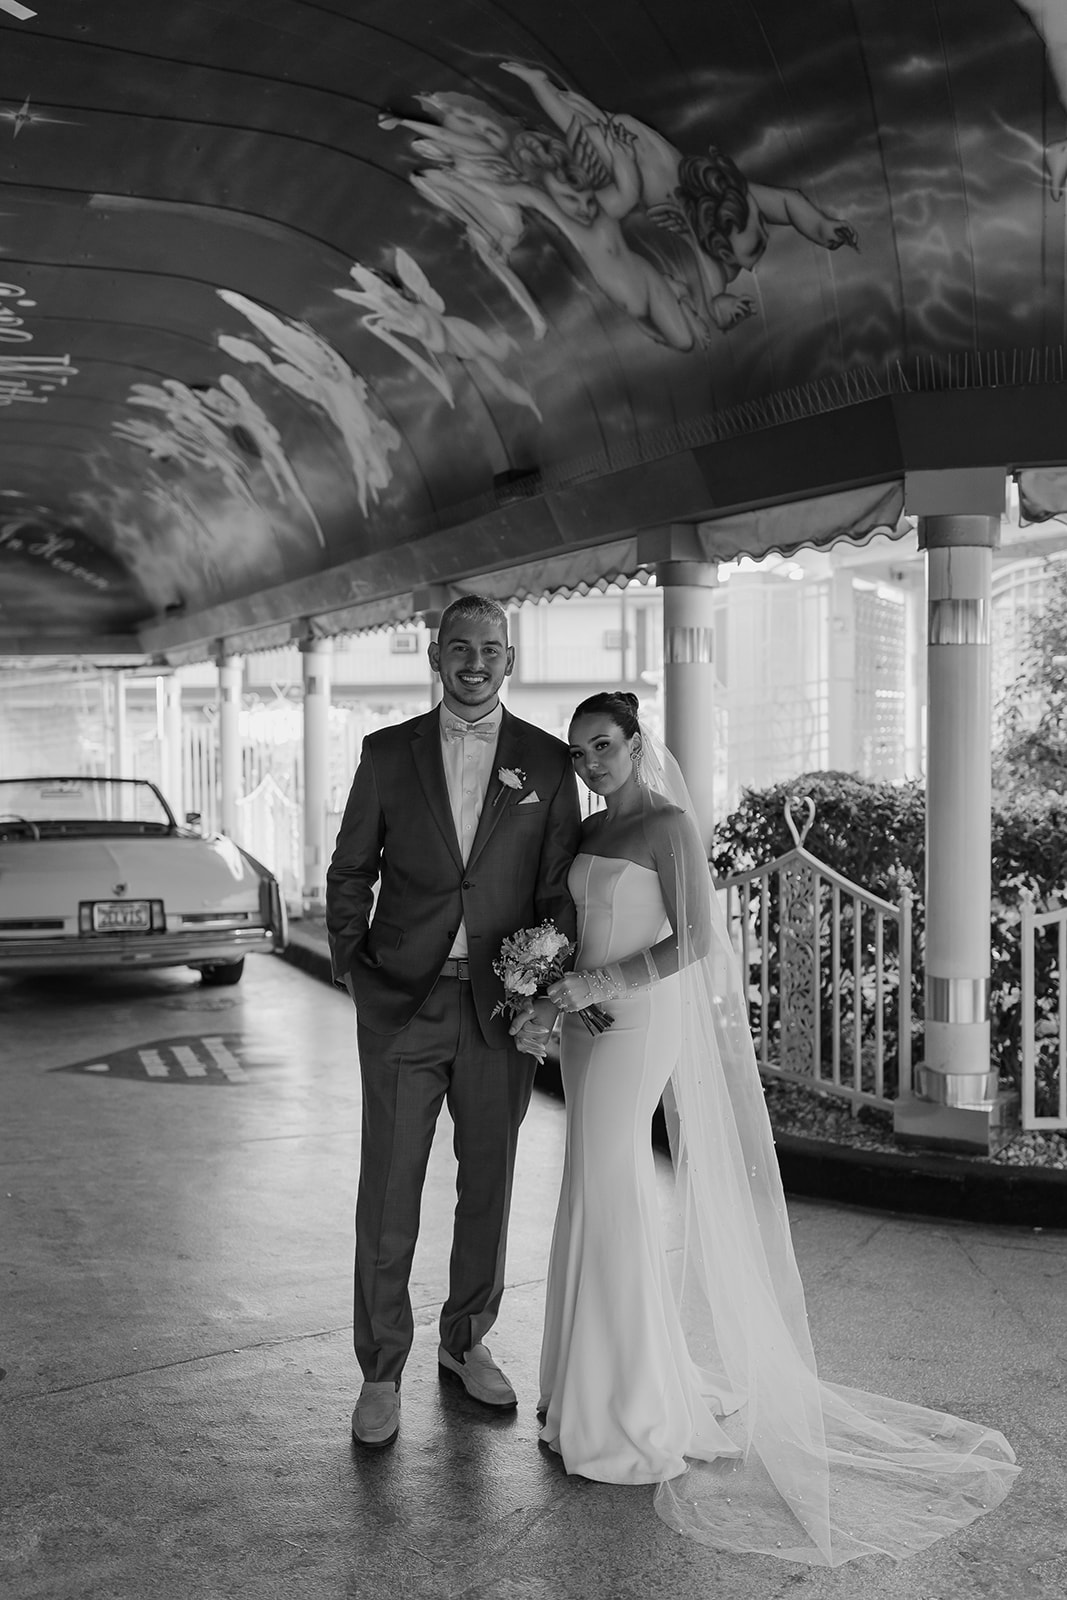 Bride and groom pose in front of a convertible